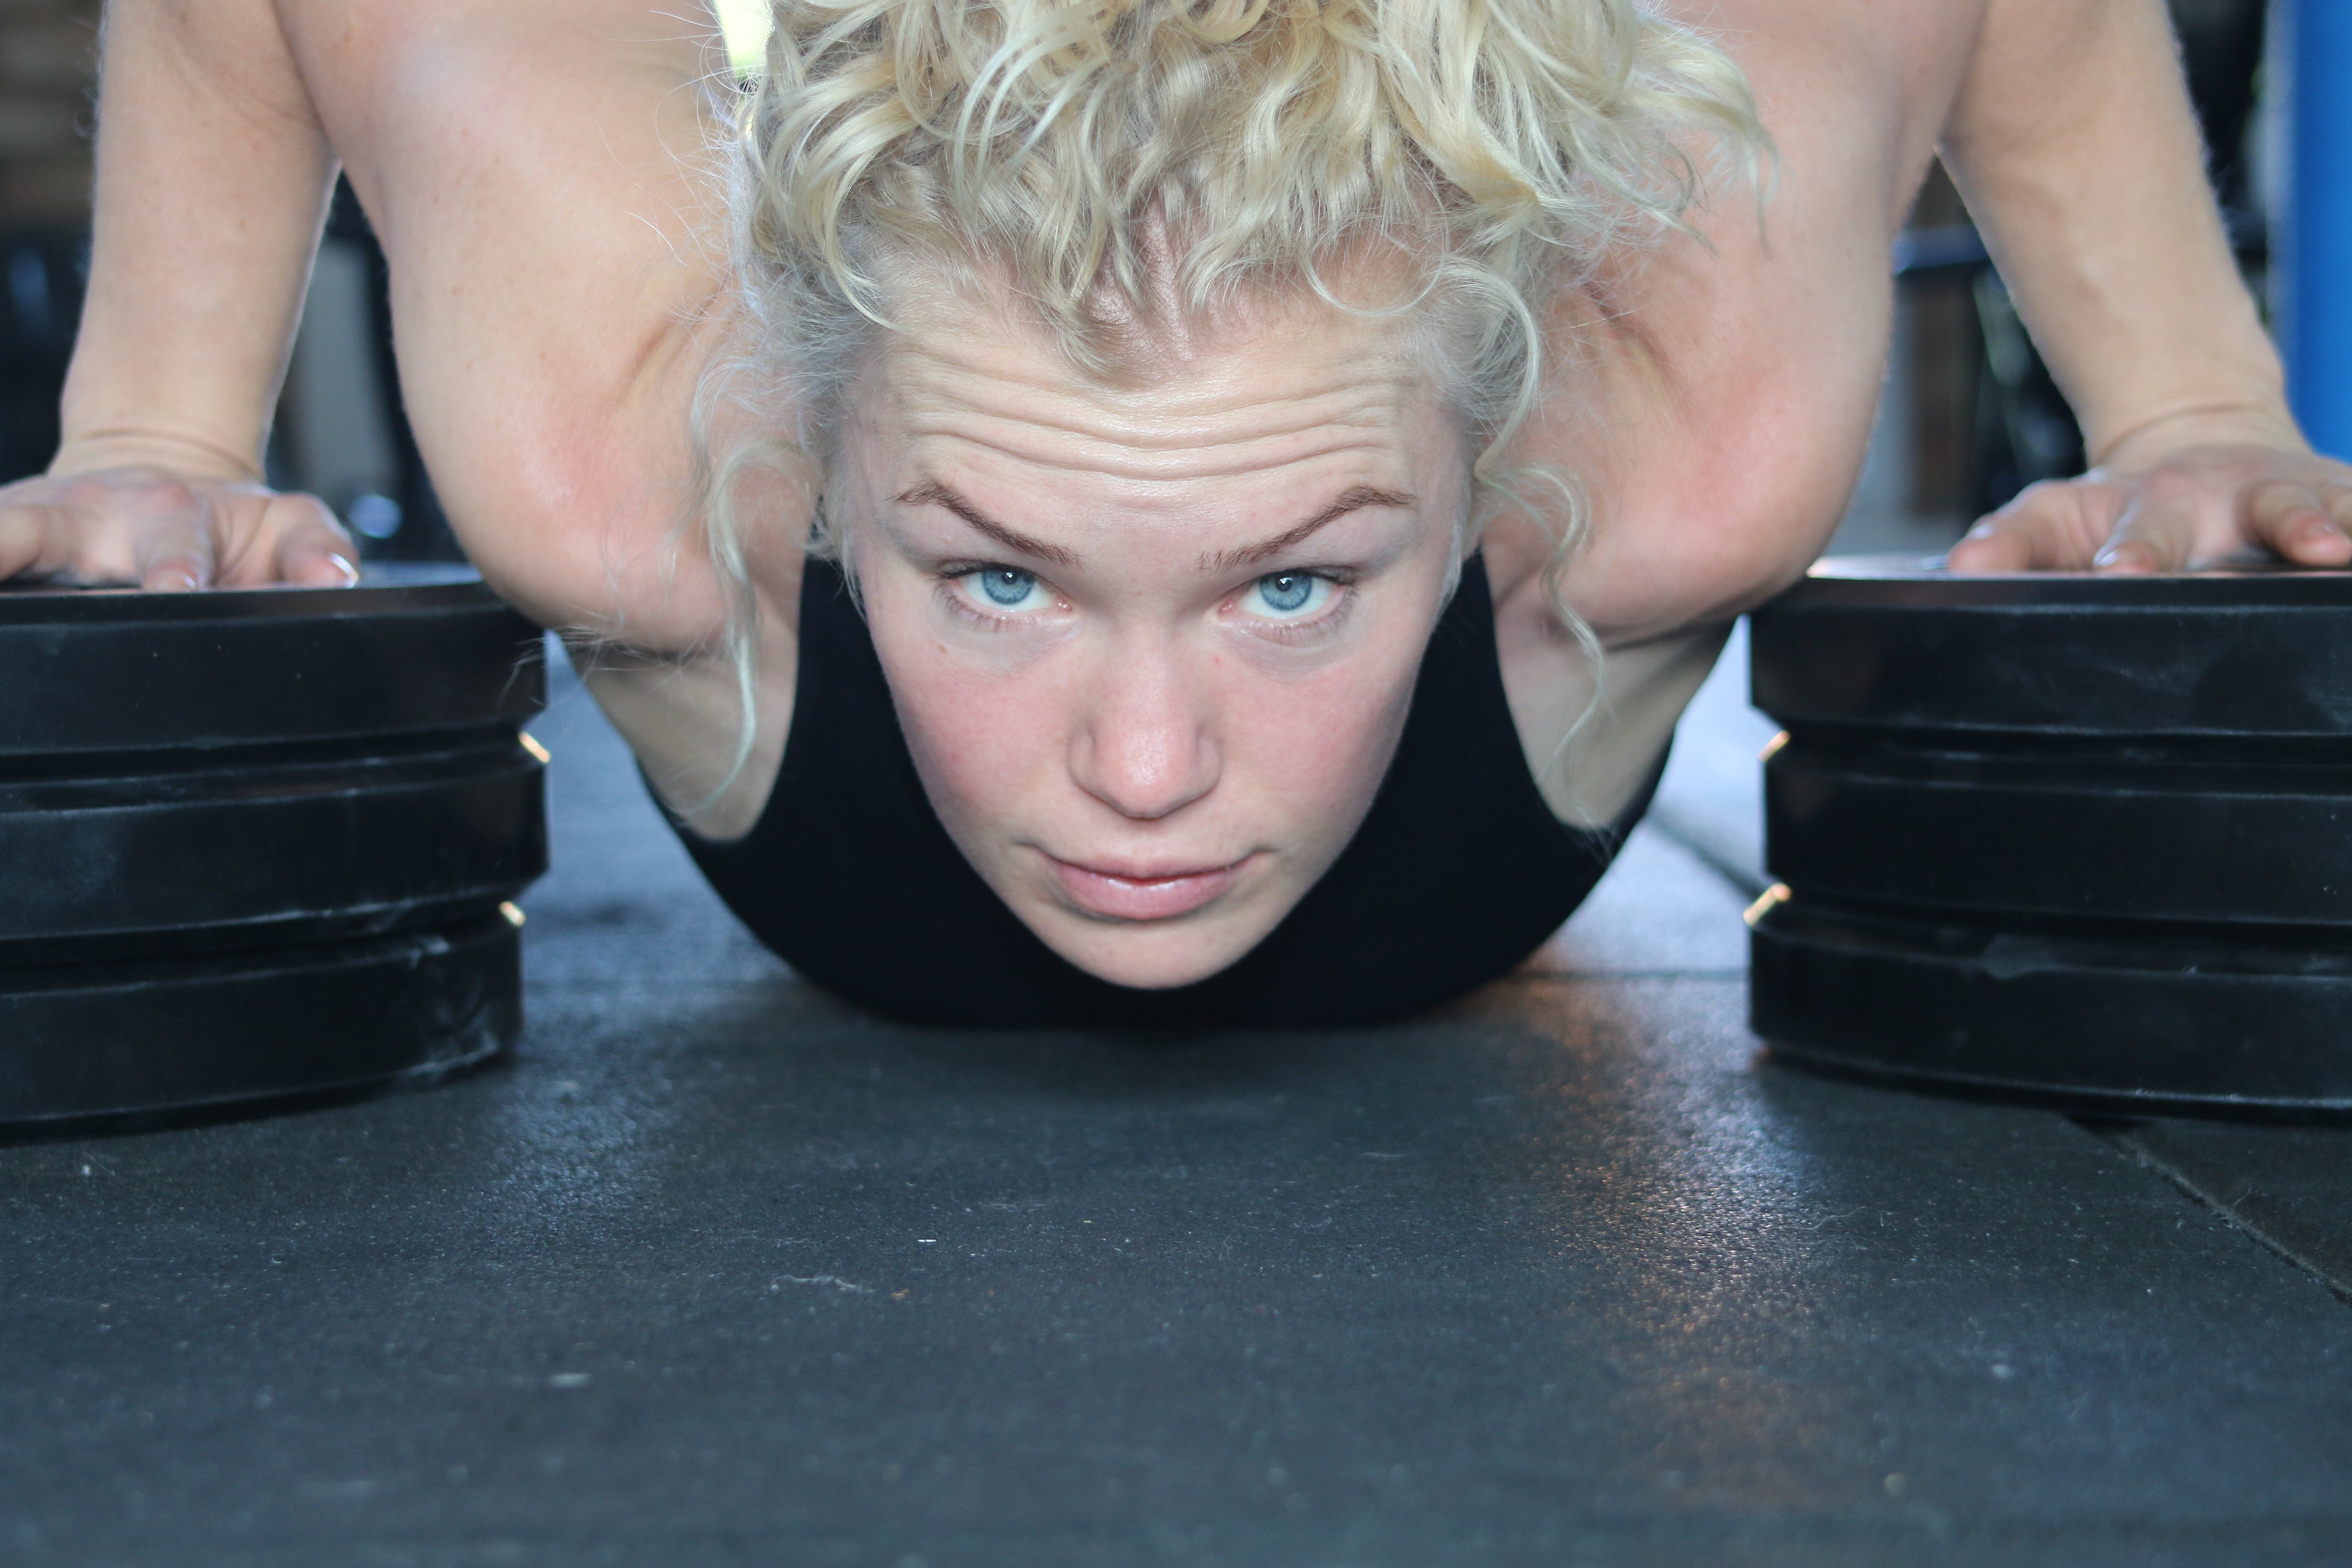 Fitness girl doing deficit push-up on plates looking directly at the camera.